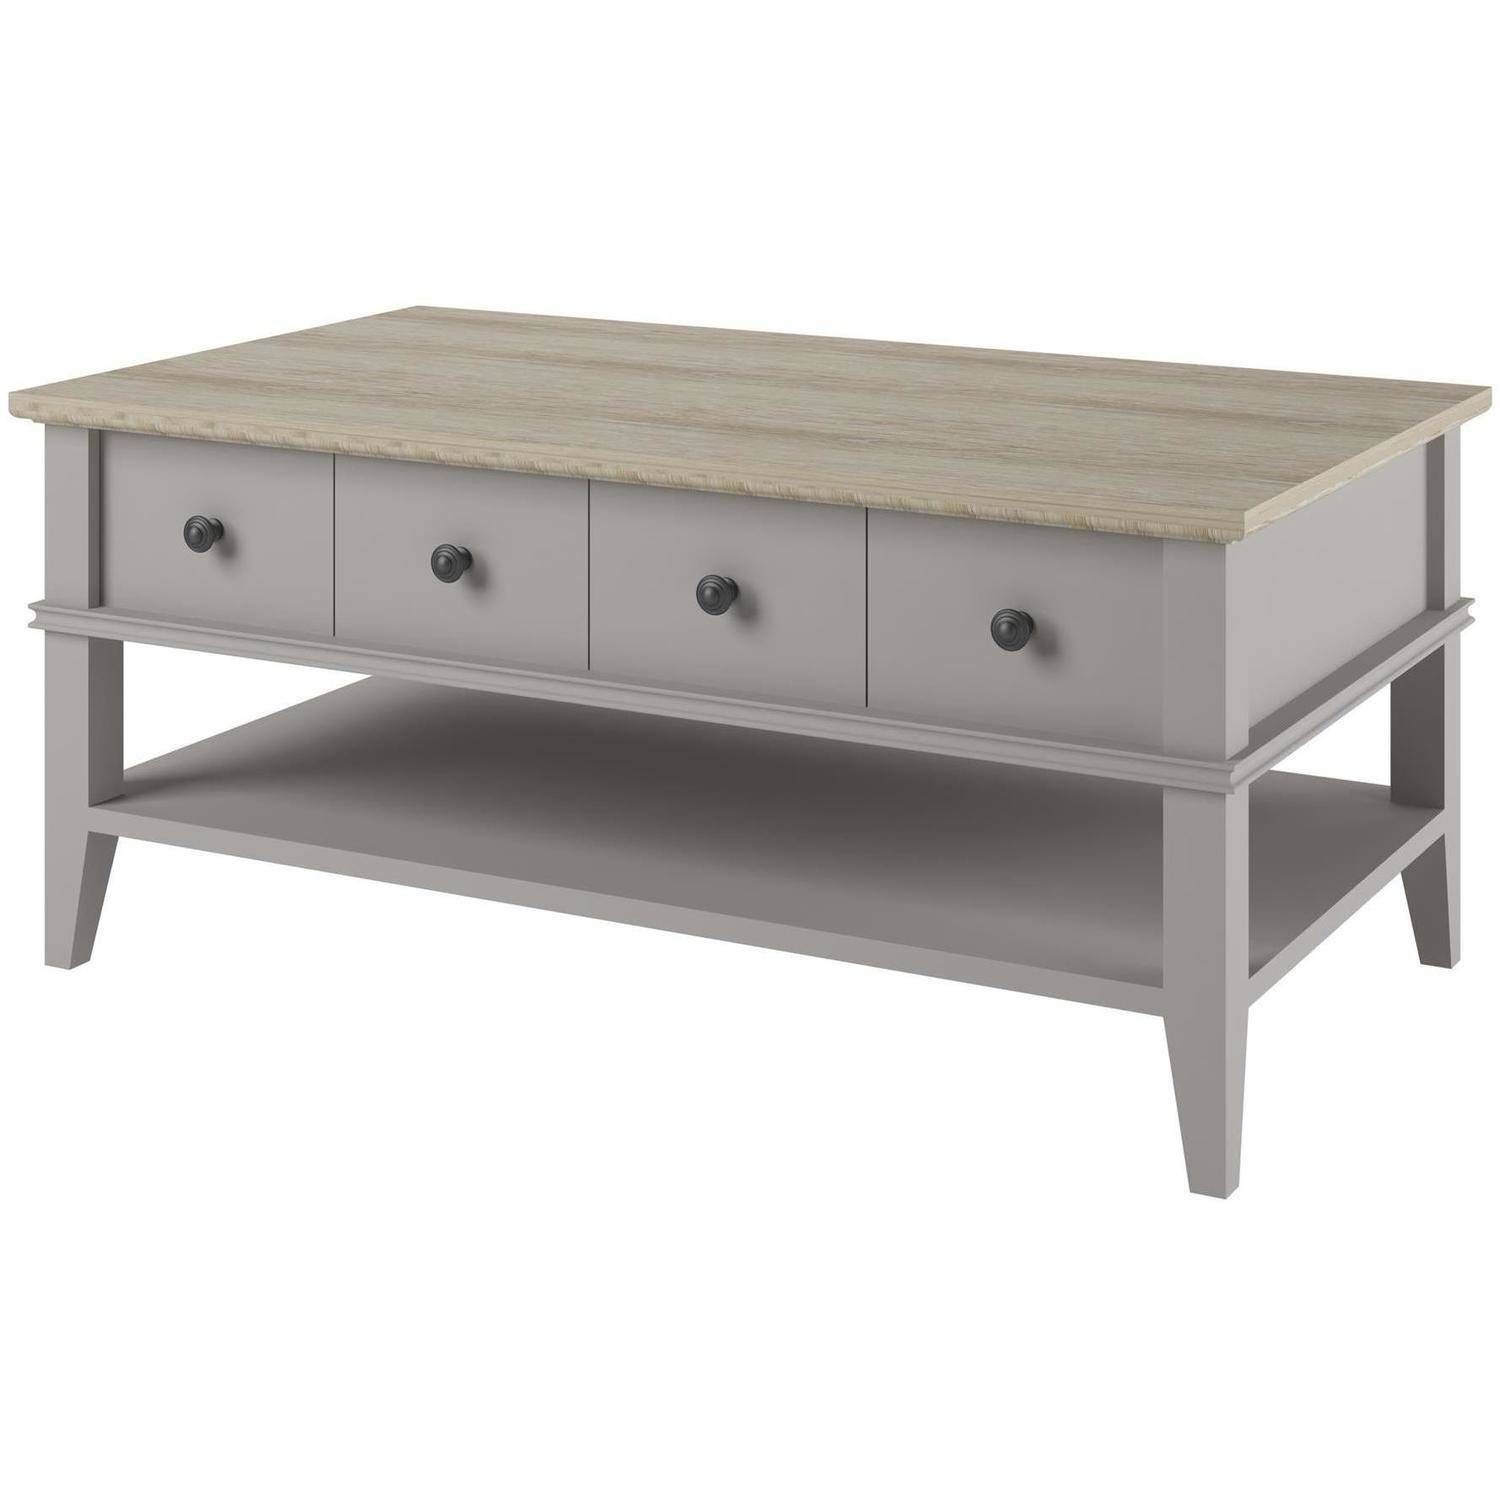 Ameriwood Home Newport Coffee Table, Light Gray/light Brown With Light Oak Coffee Tables With Drawers (View 17 of 30)